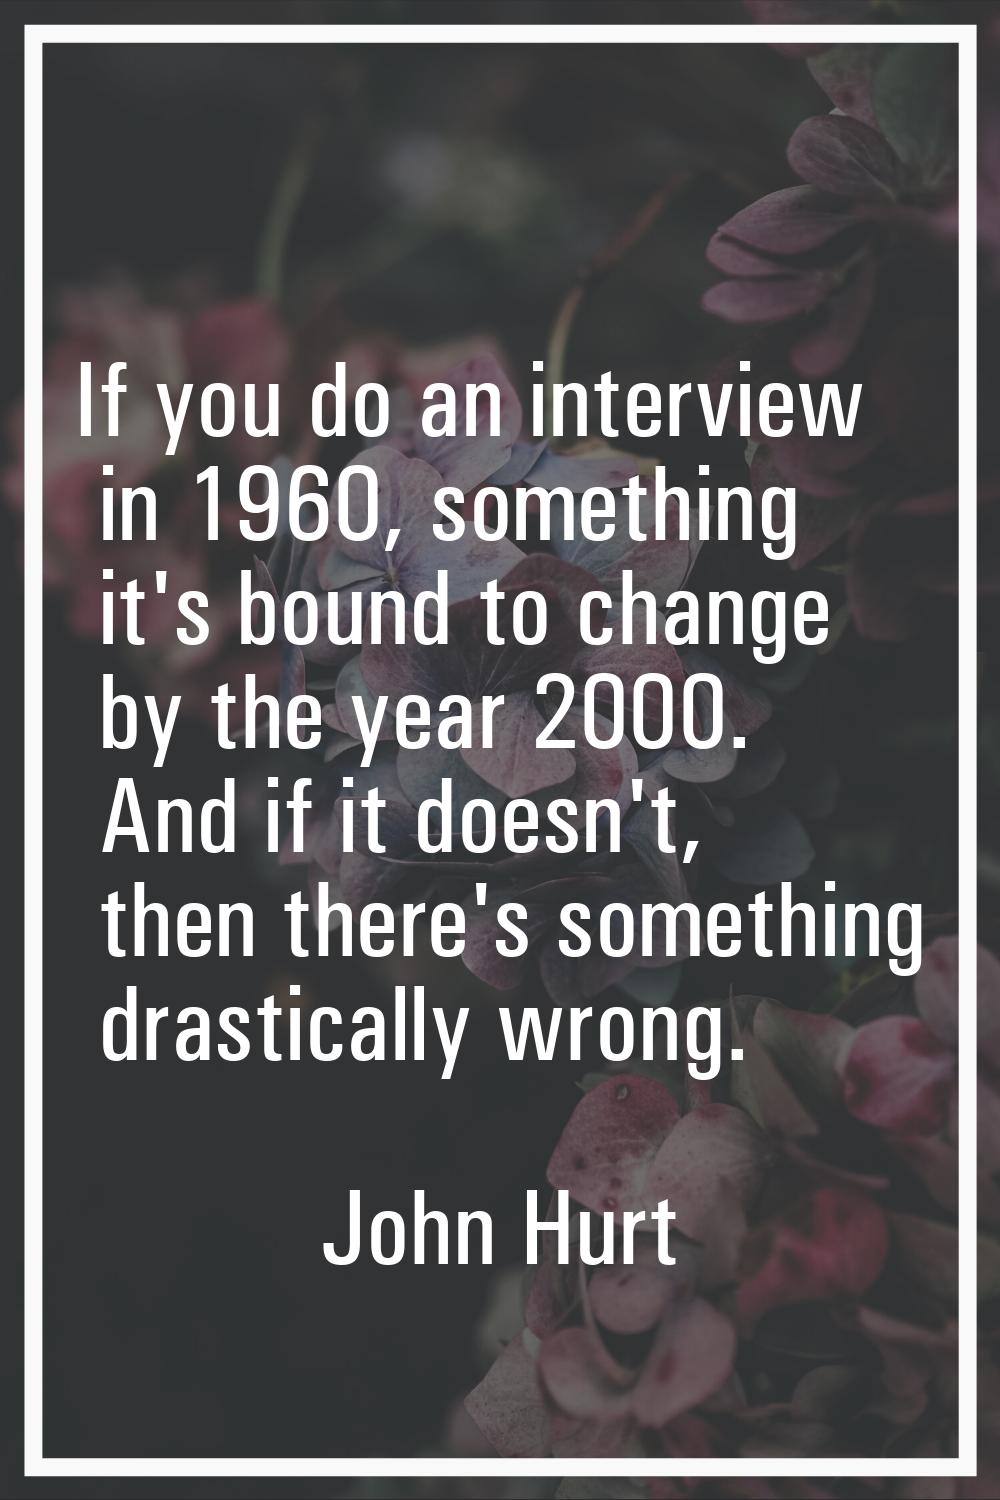 If you do an interview in 1960, something it's bound to change by the year 2000. And if it doesn't,